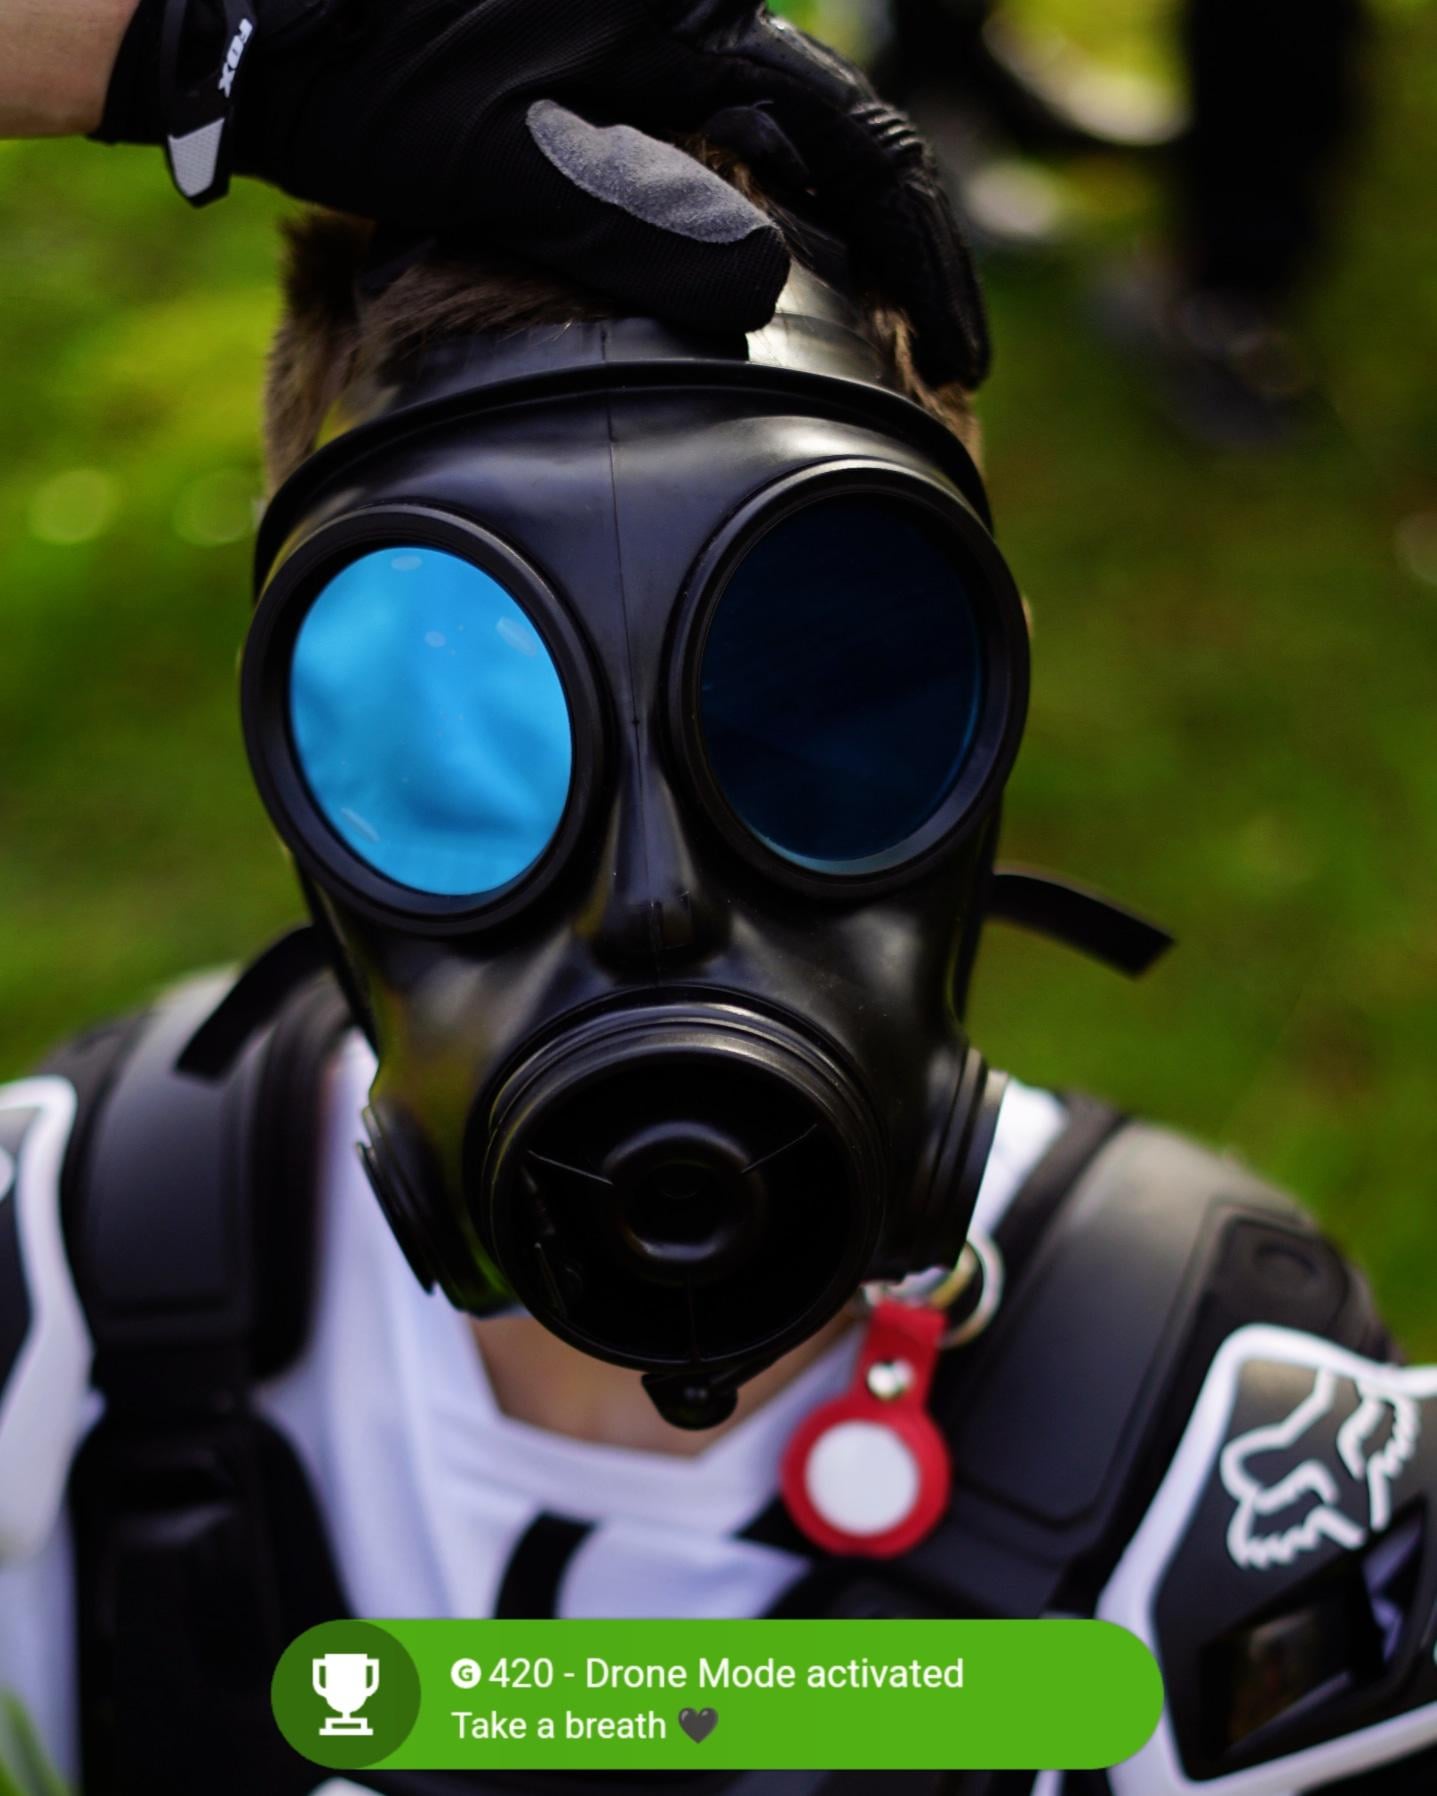 Fist time trying on a Gasmask